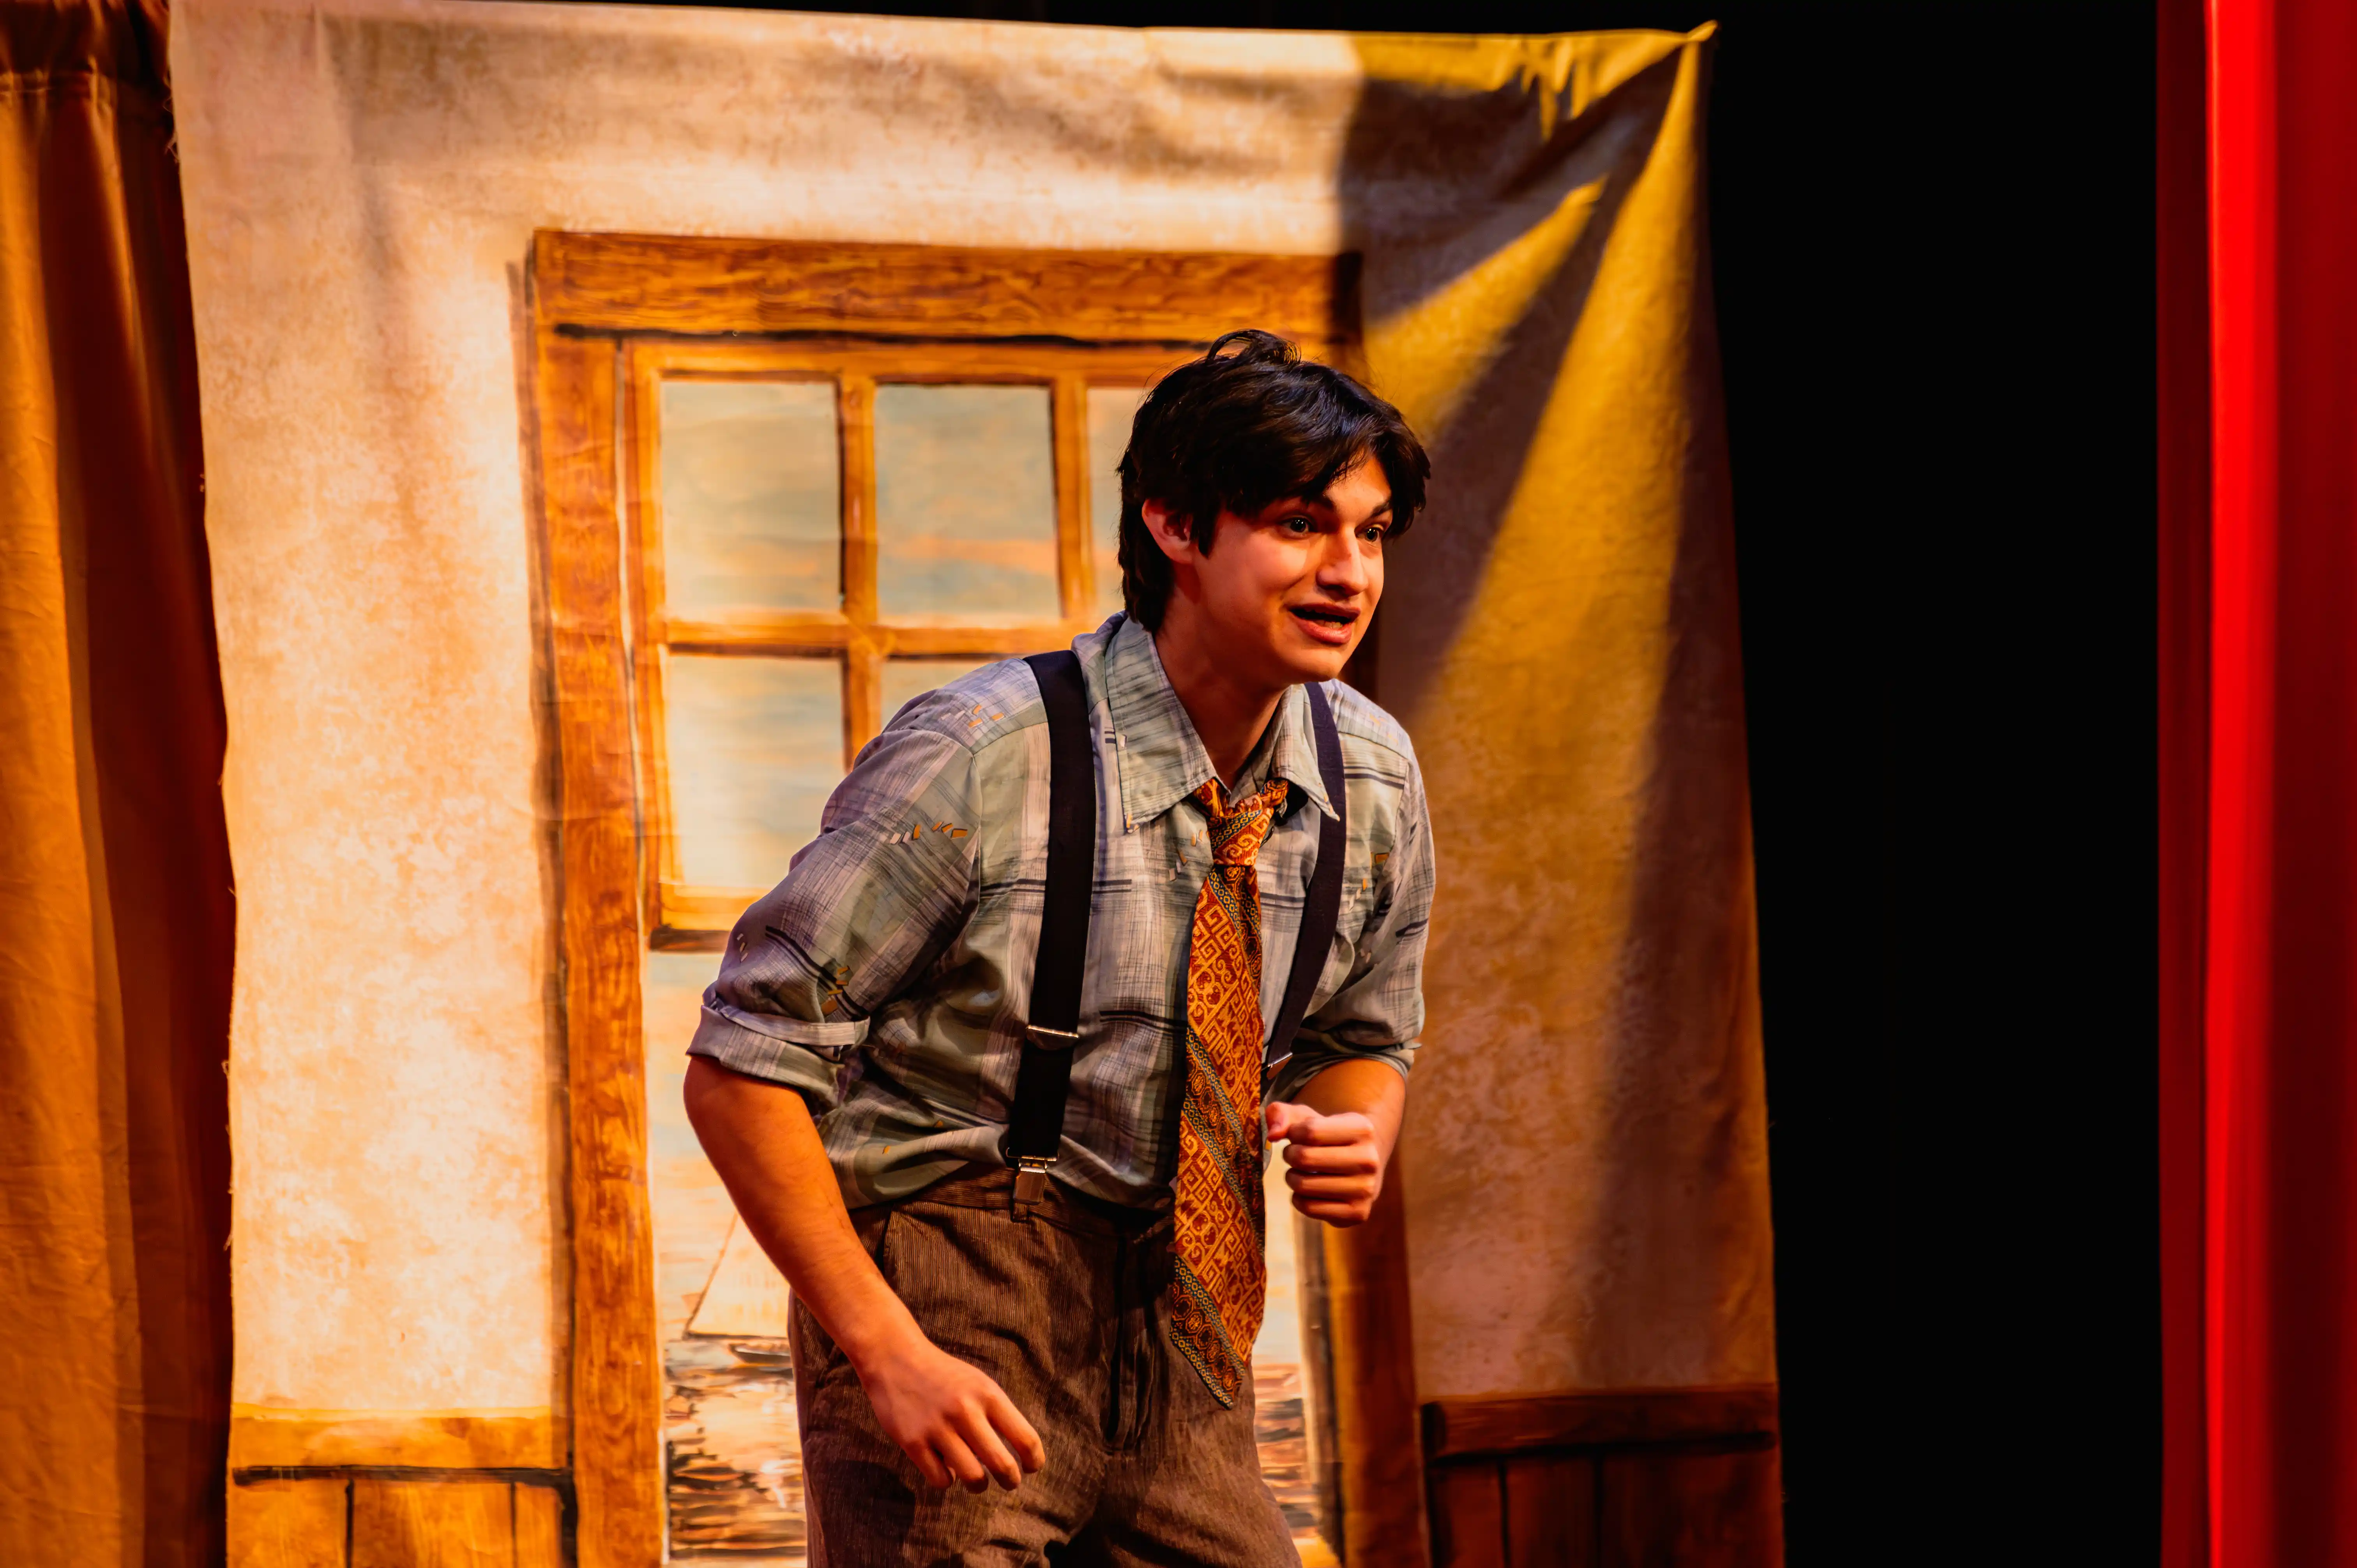 Actor on stage performing in a play with a painted backdrop of a window.